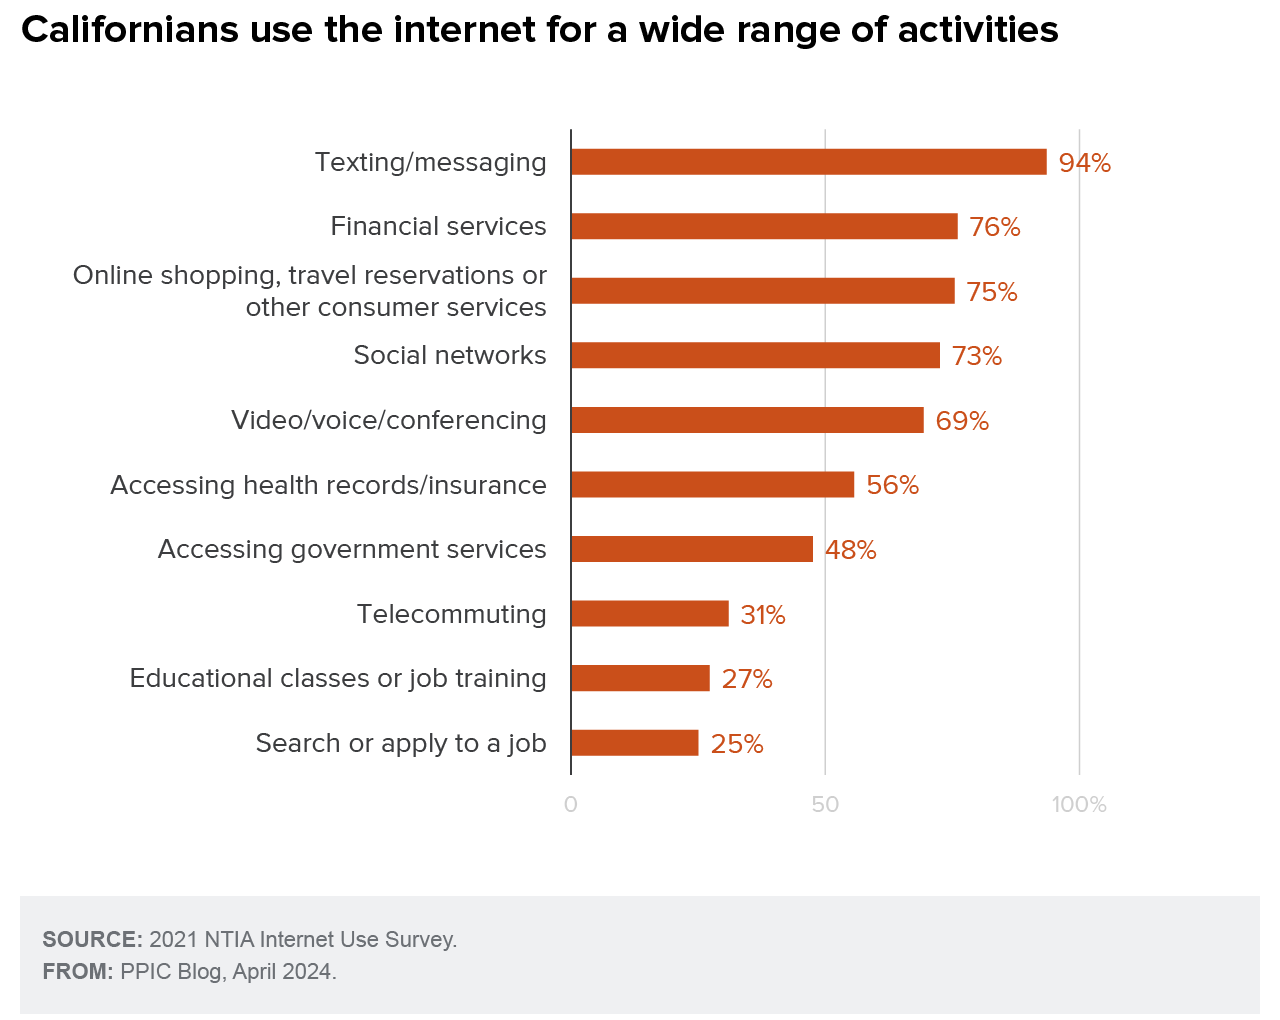 figure - Californians use the internet for a wide range of activities